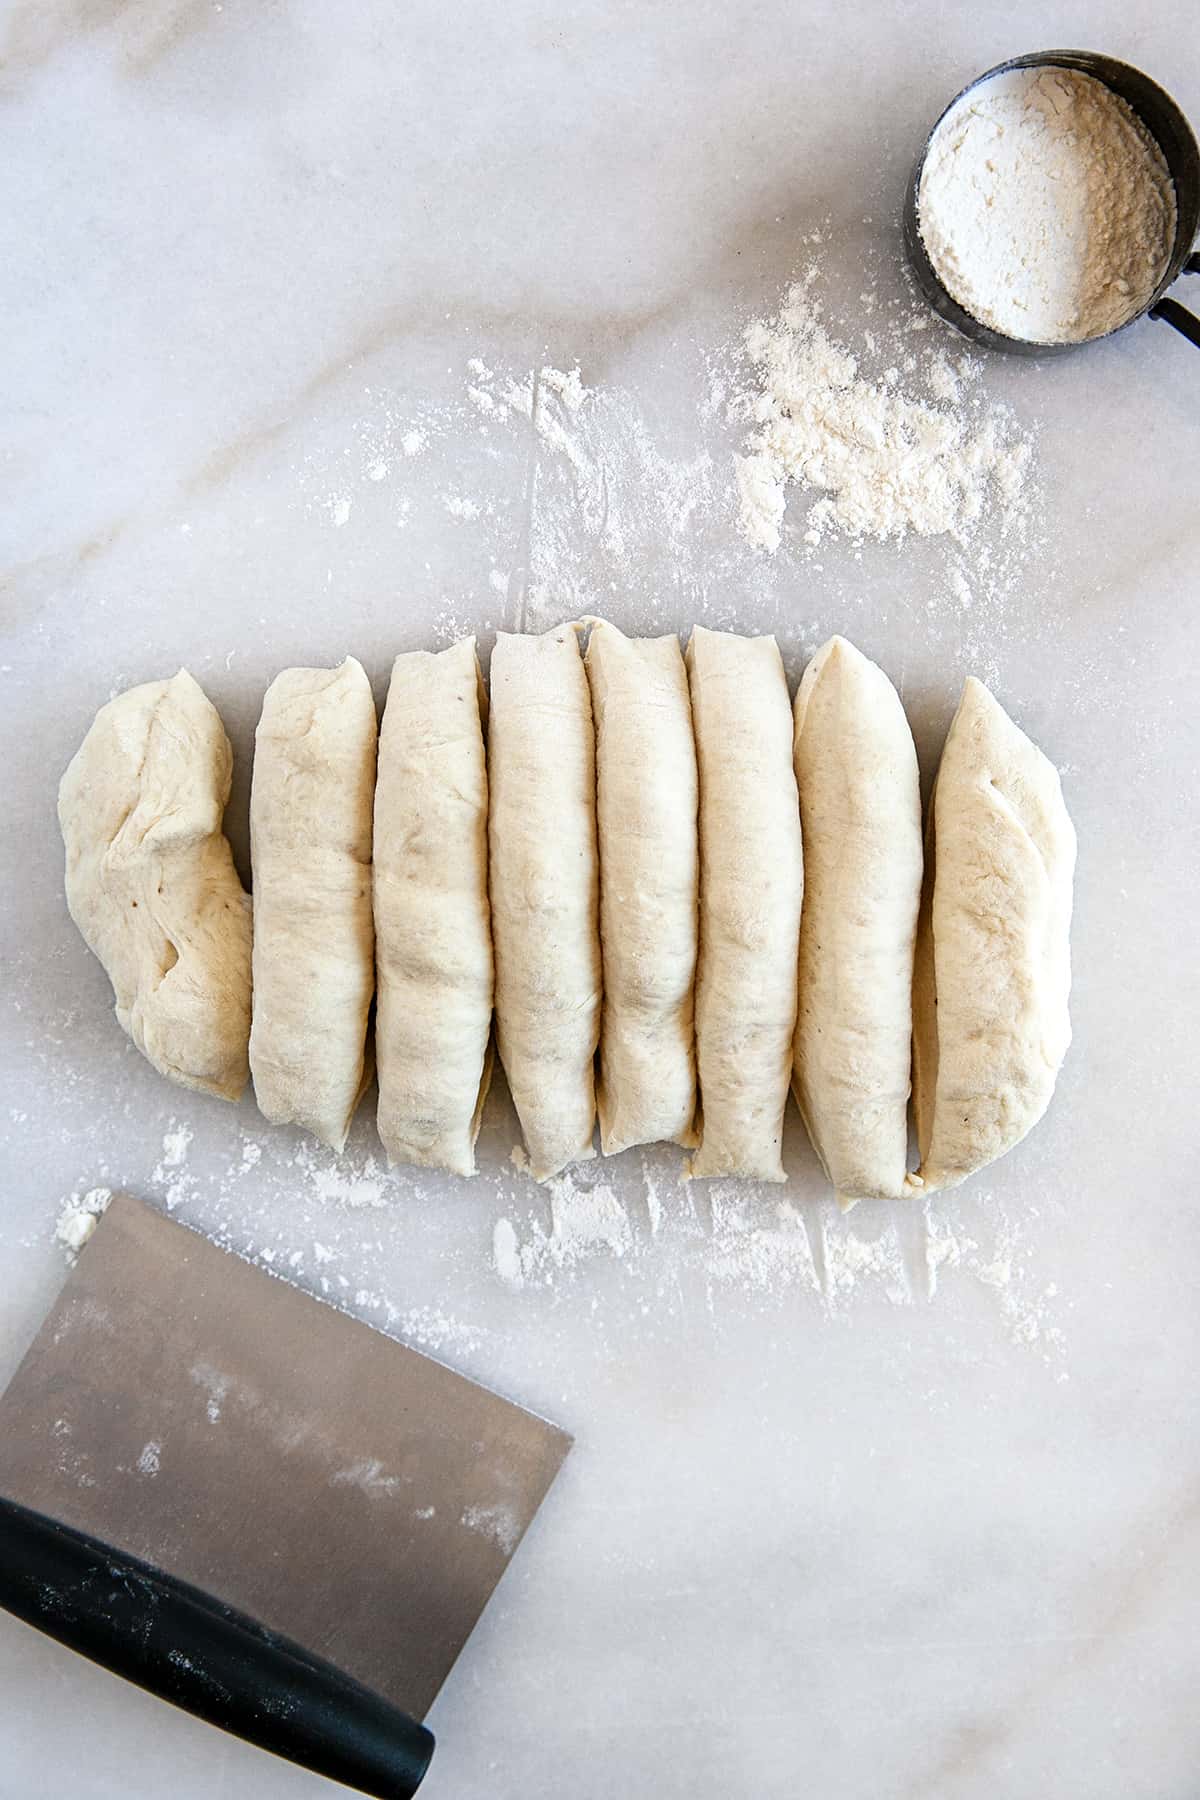 Bread dough cut into 8 sections. 